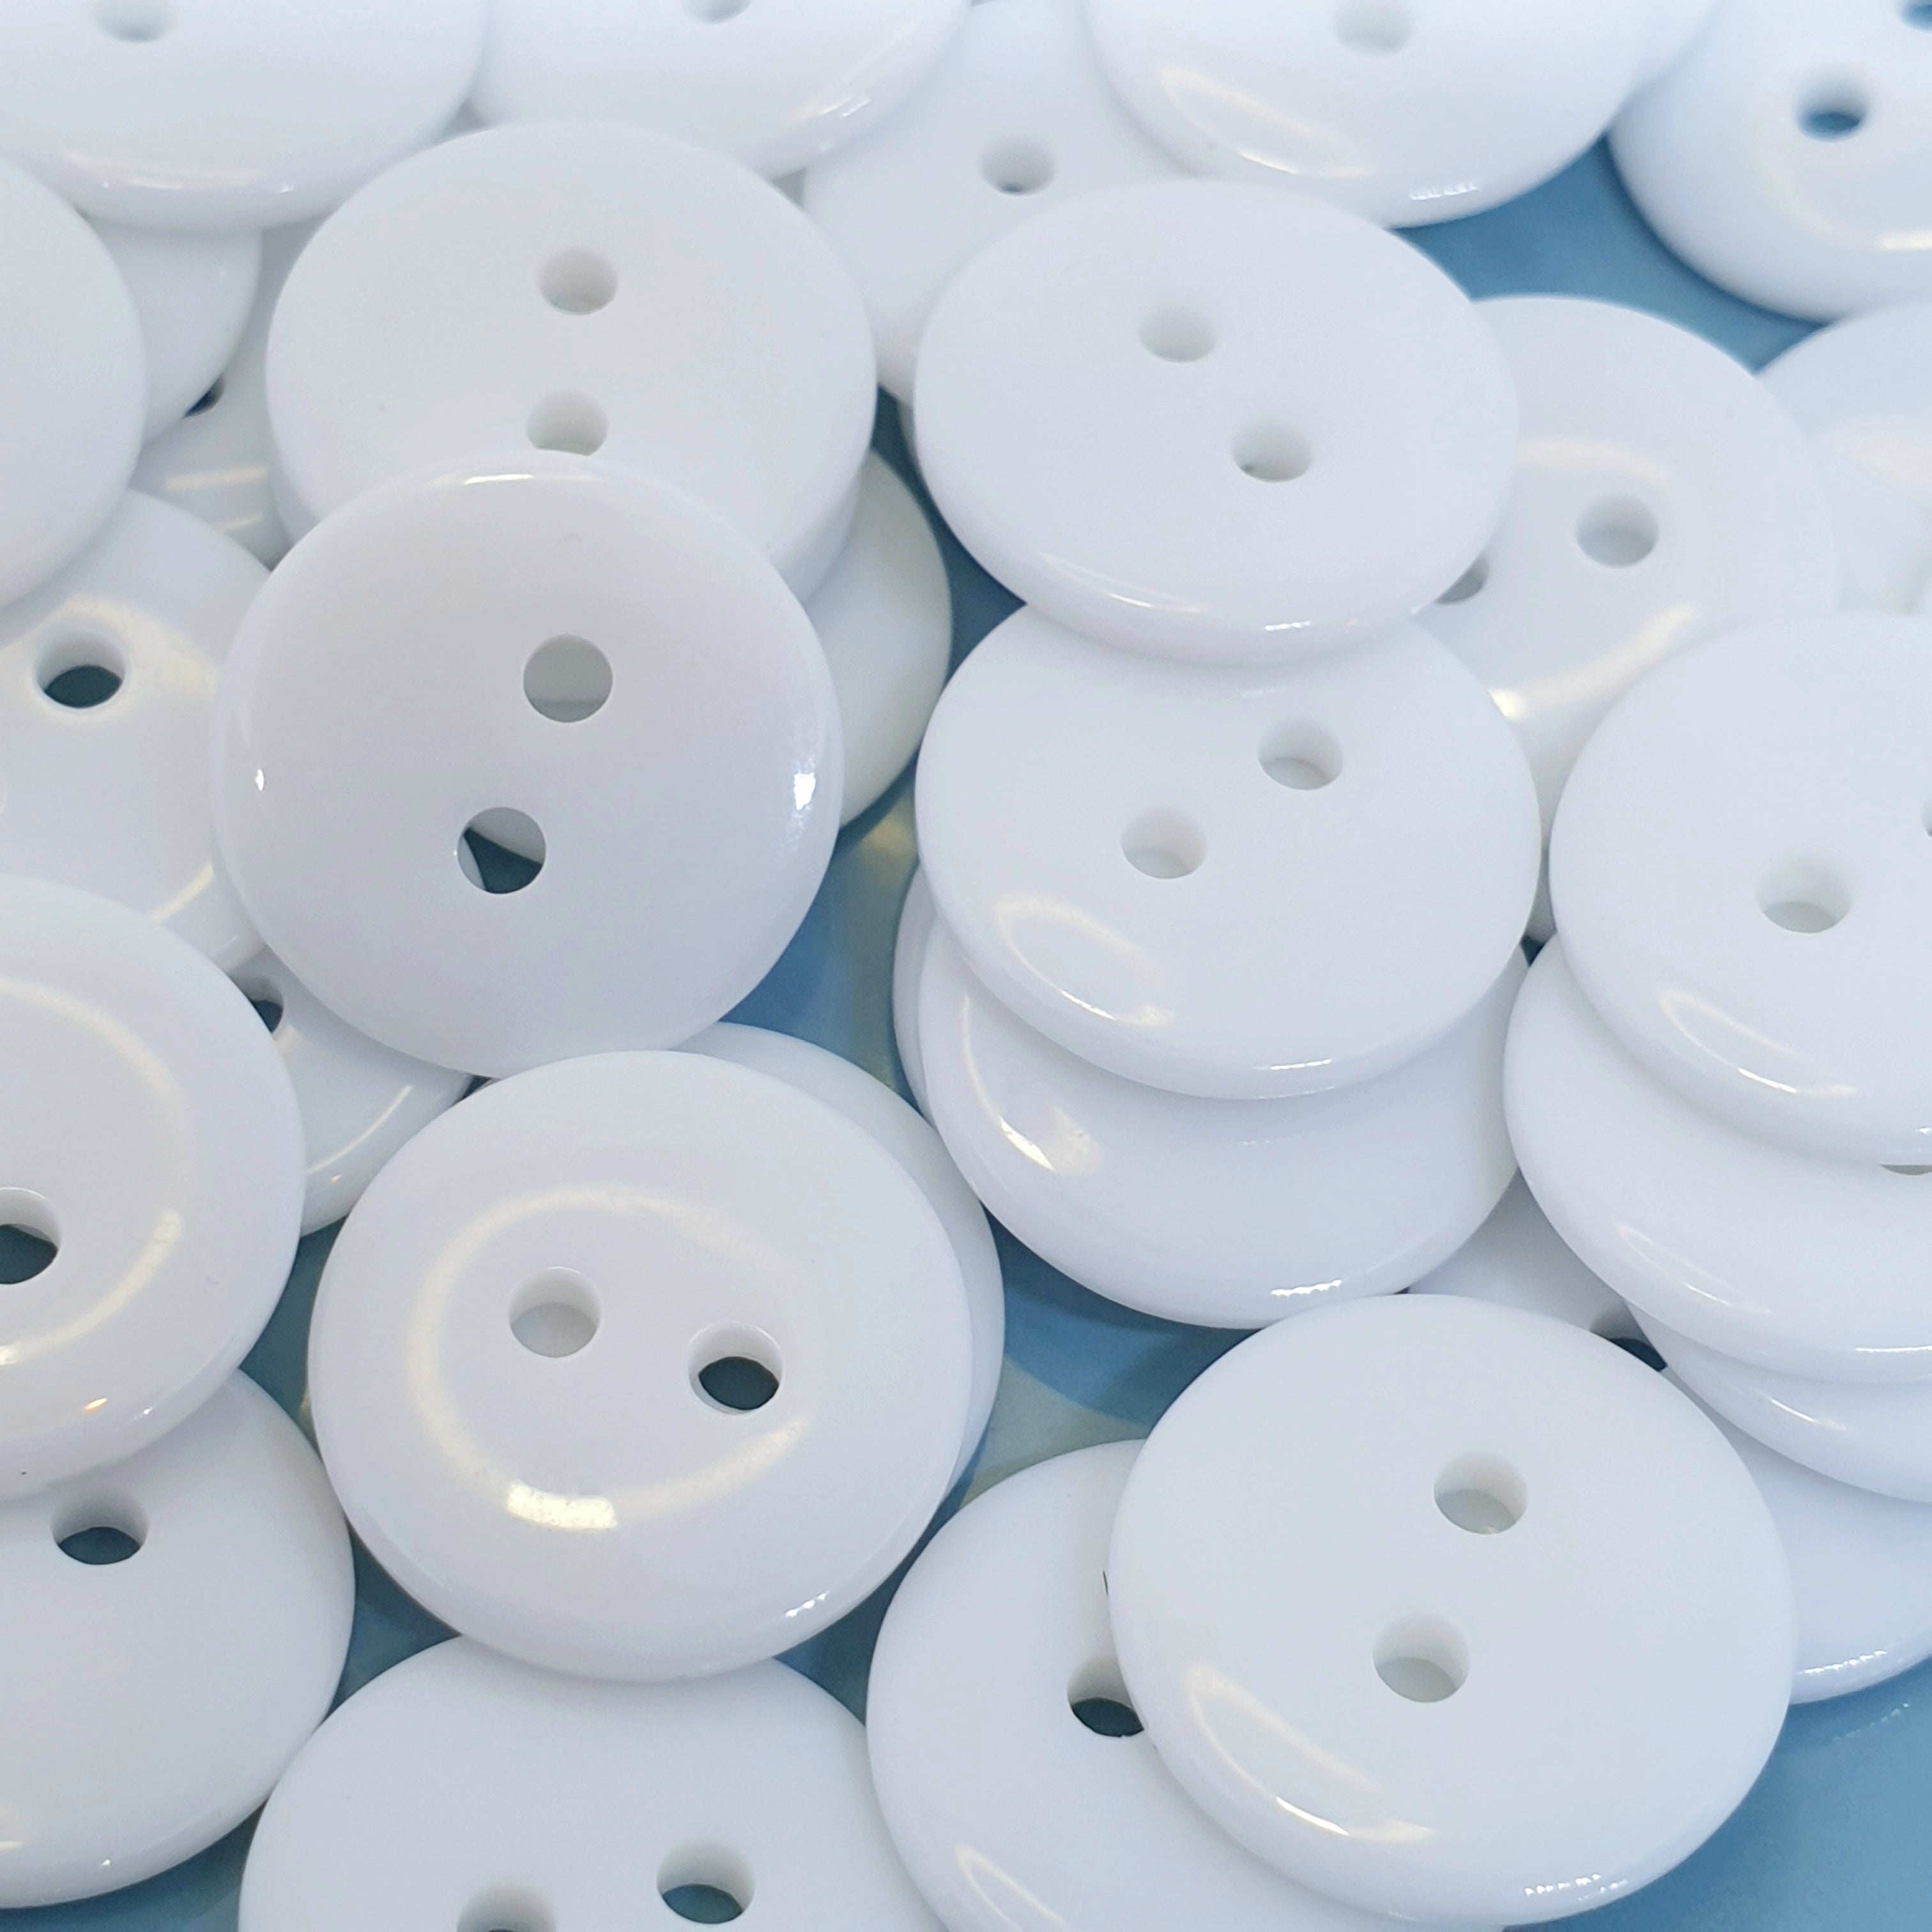 MajorCrafts 50pcs 18mm Glossy White 2 Holes Round Resin Sewing Buttons